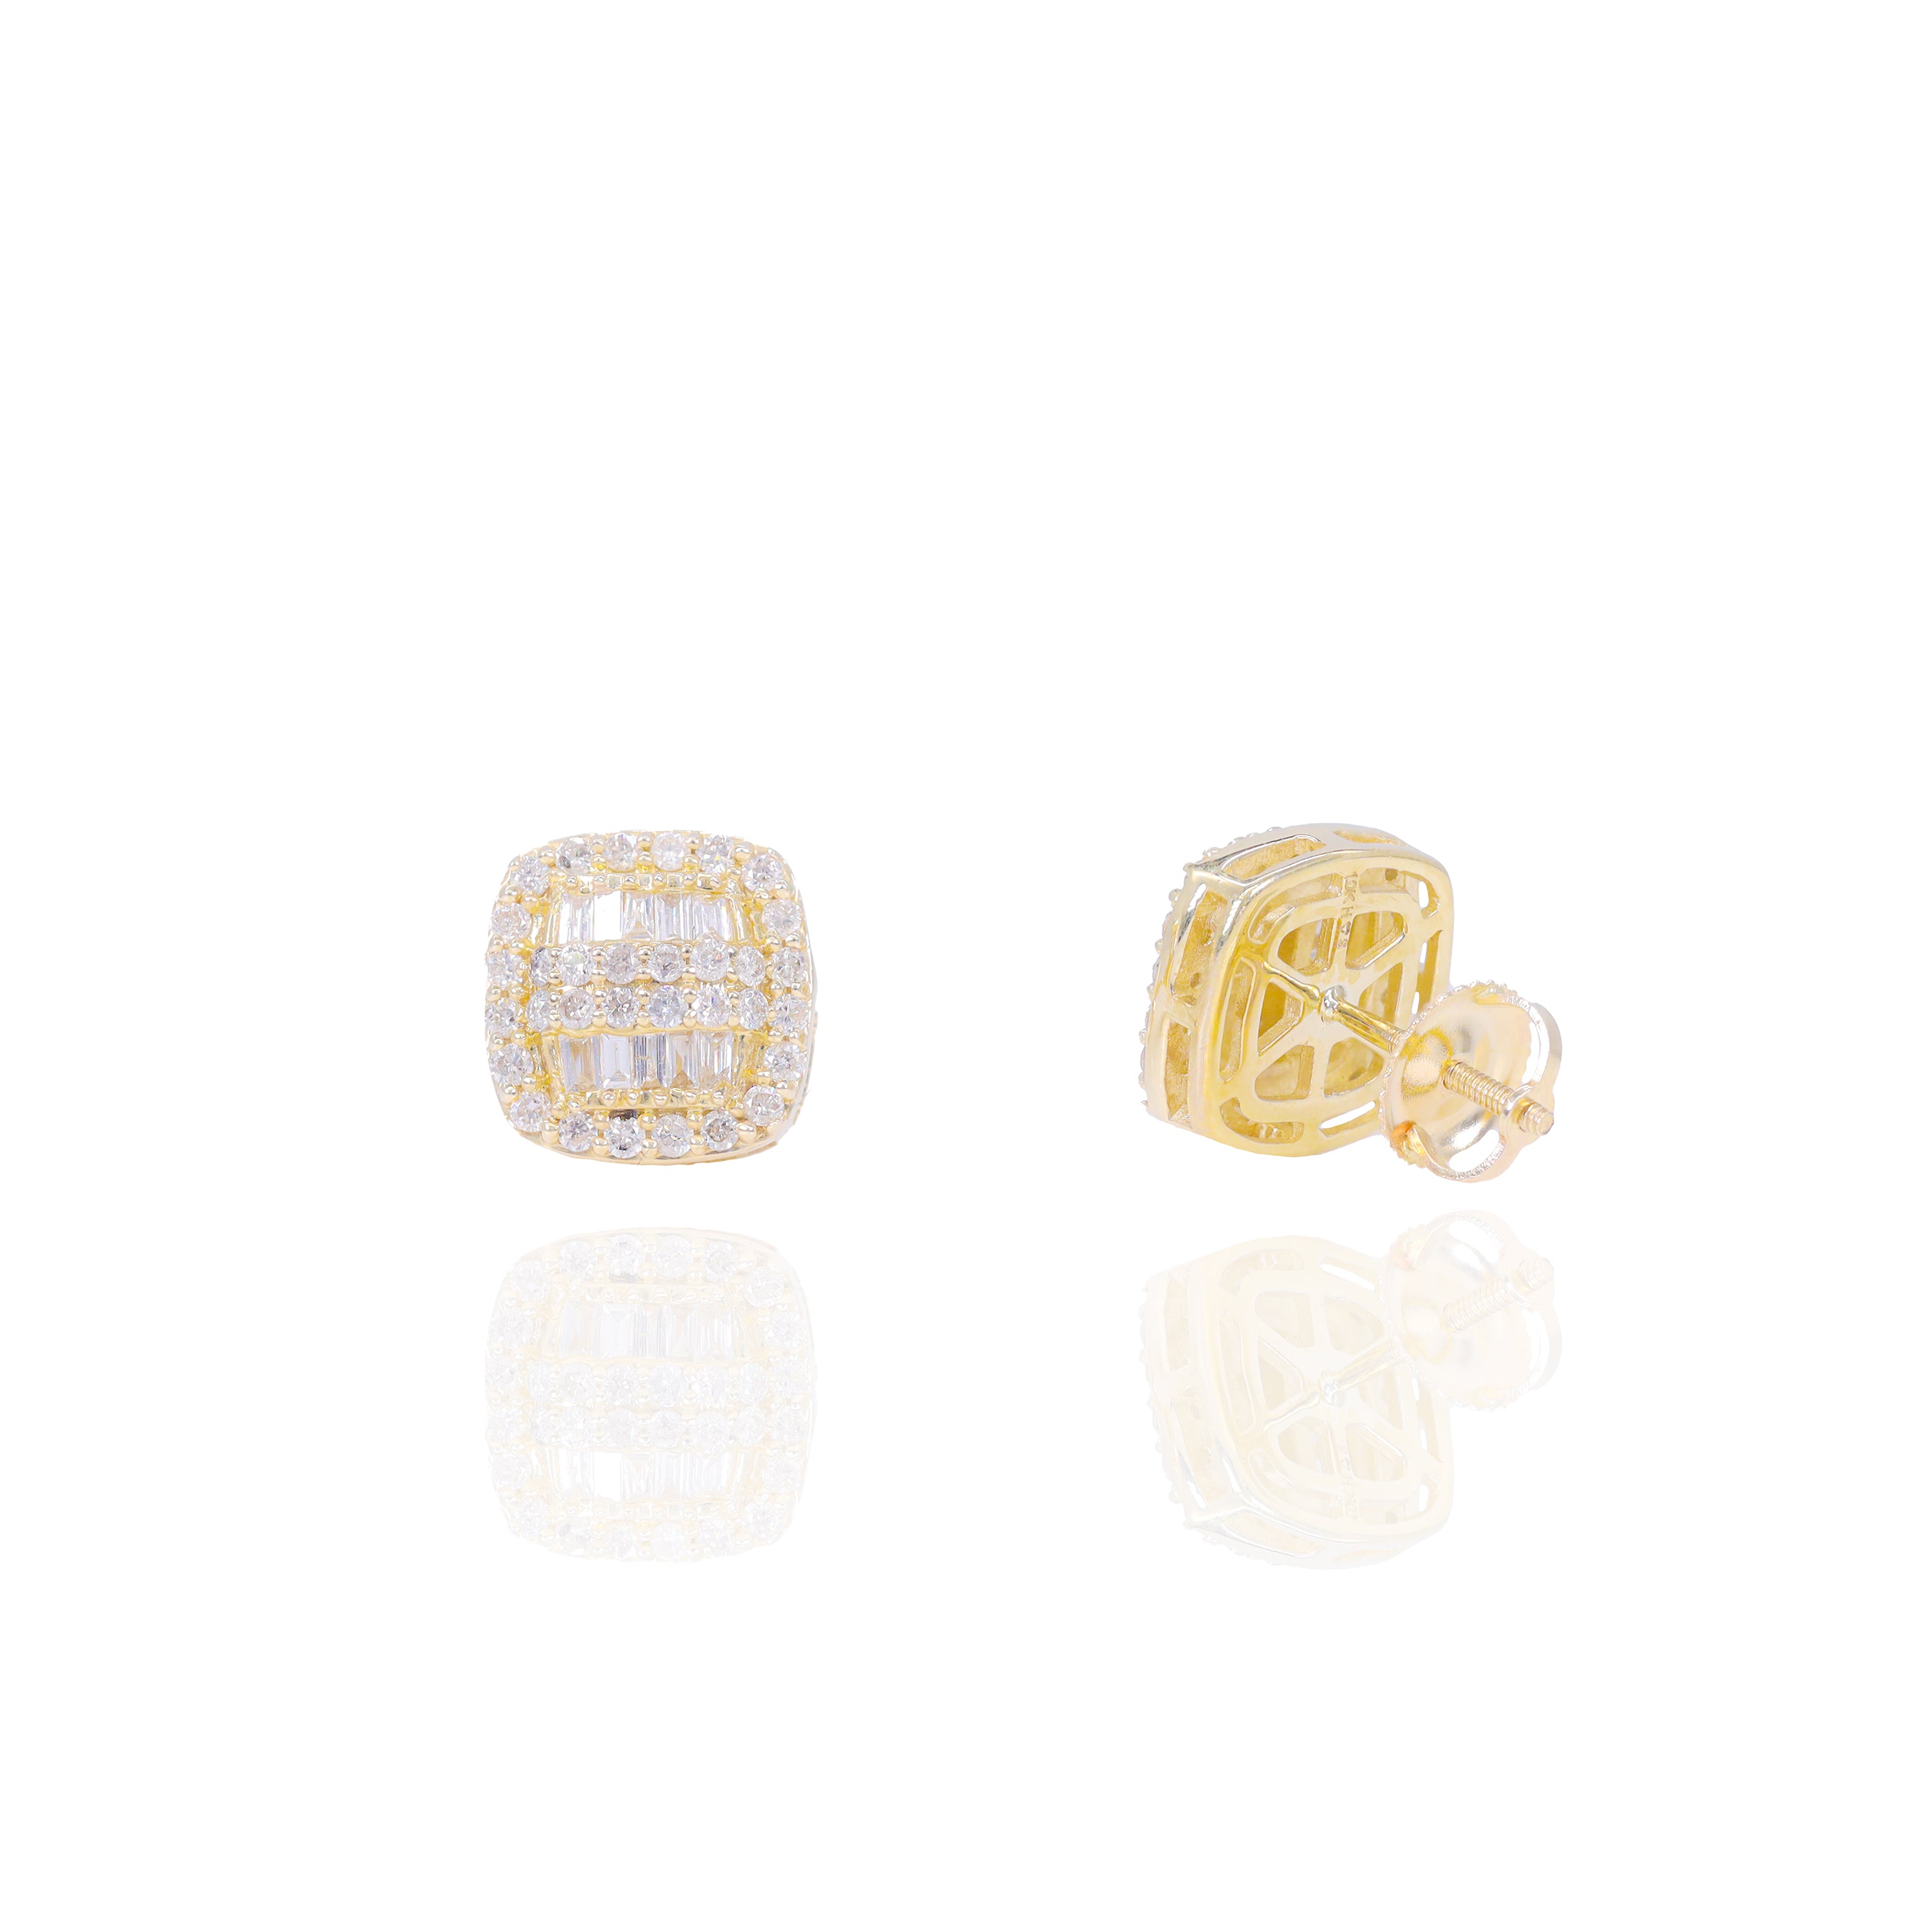 Square 2 Row Baguettes and Round Diamond Earrings